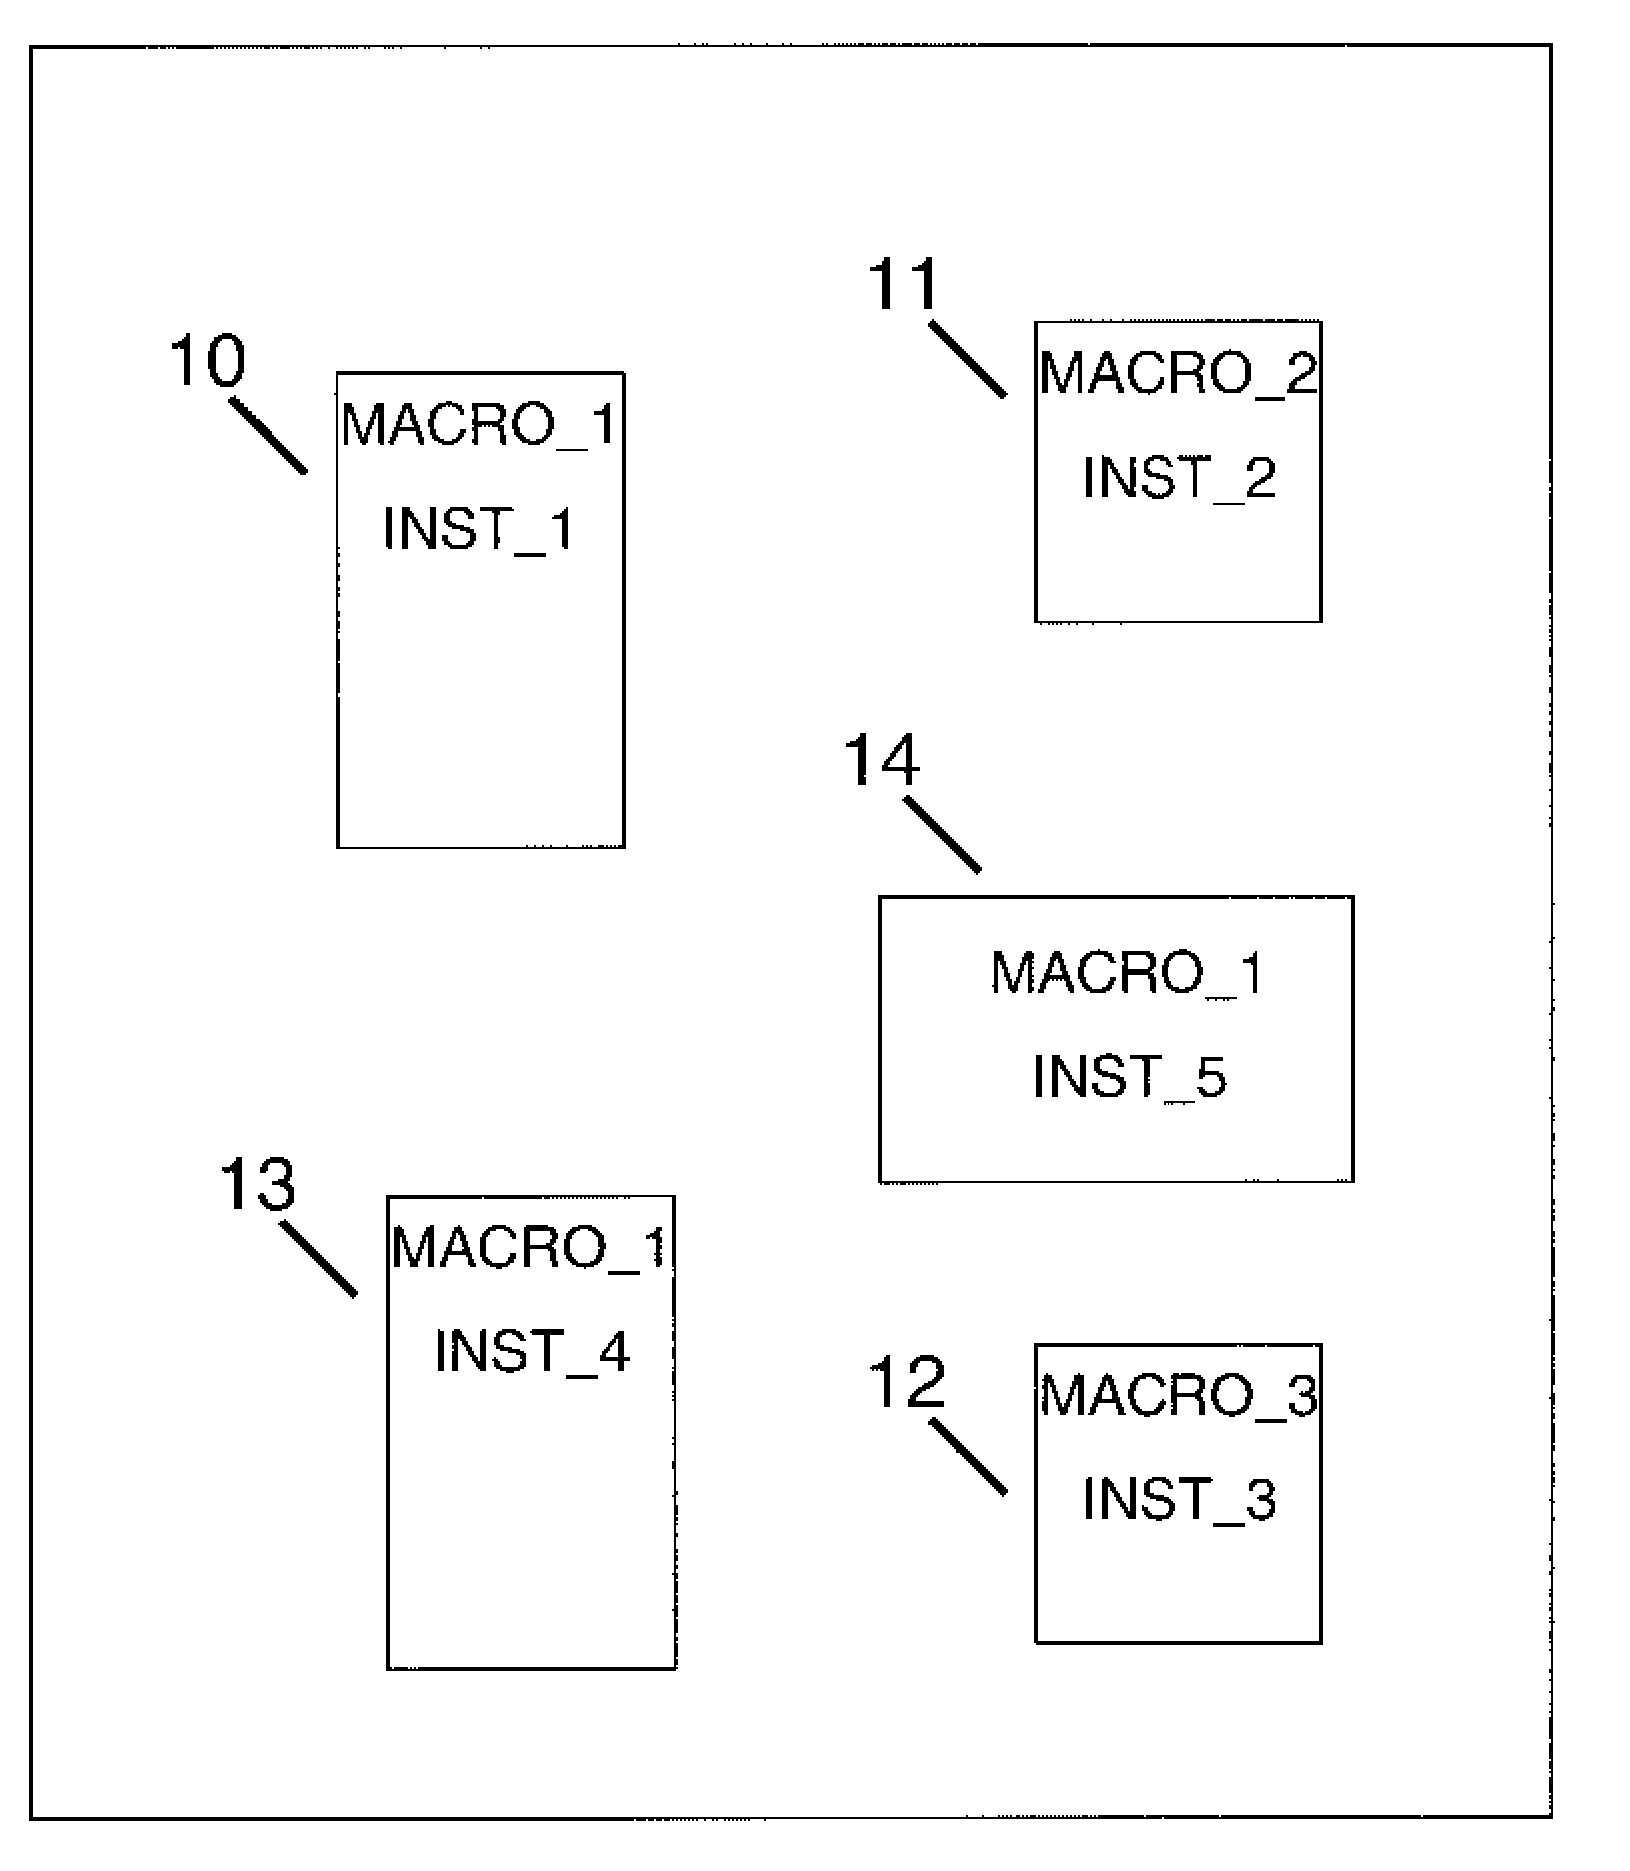 Method for Replicating and Synchronizing a Plurality of Physical Instances with a Logical Master